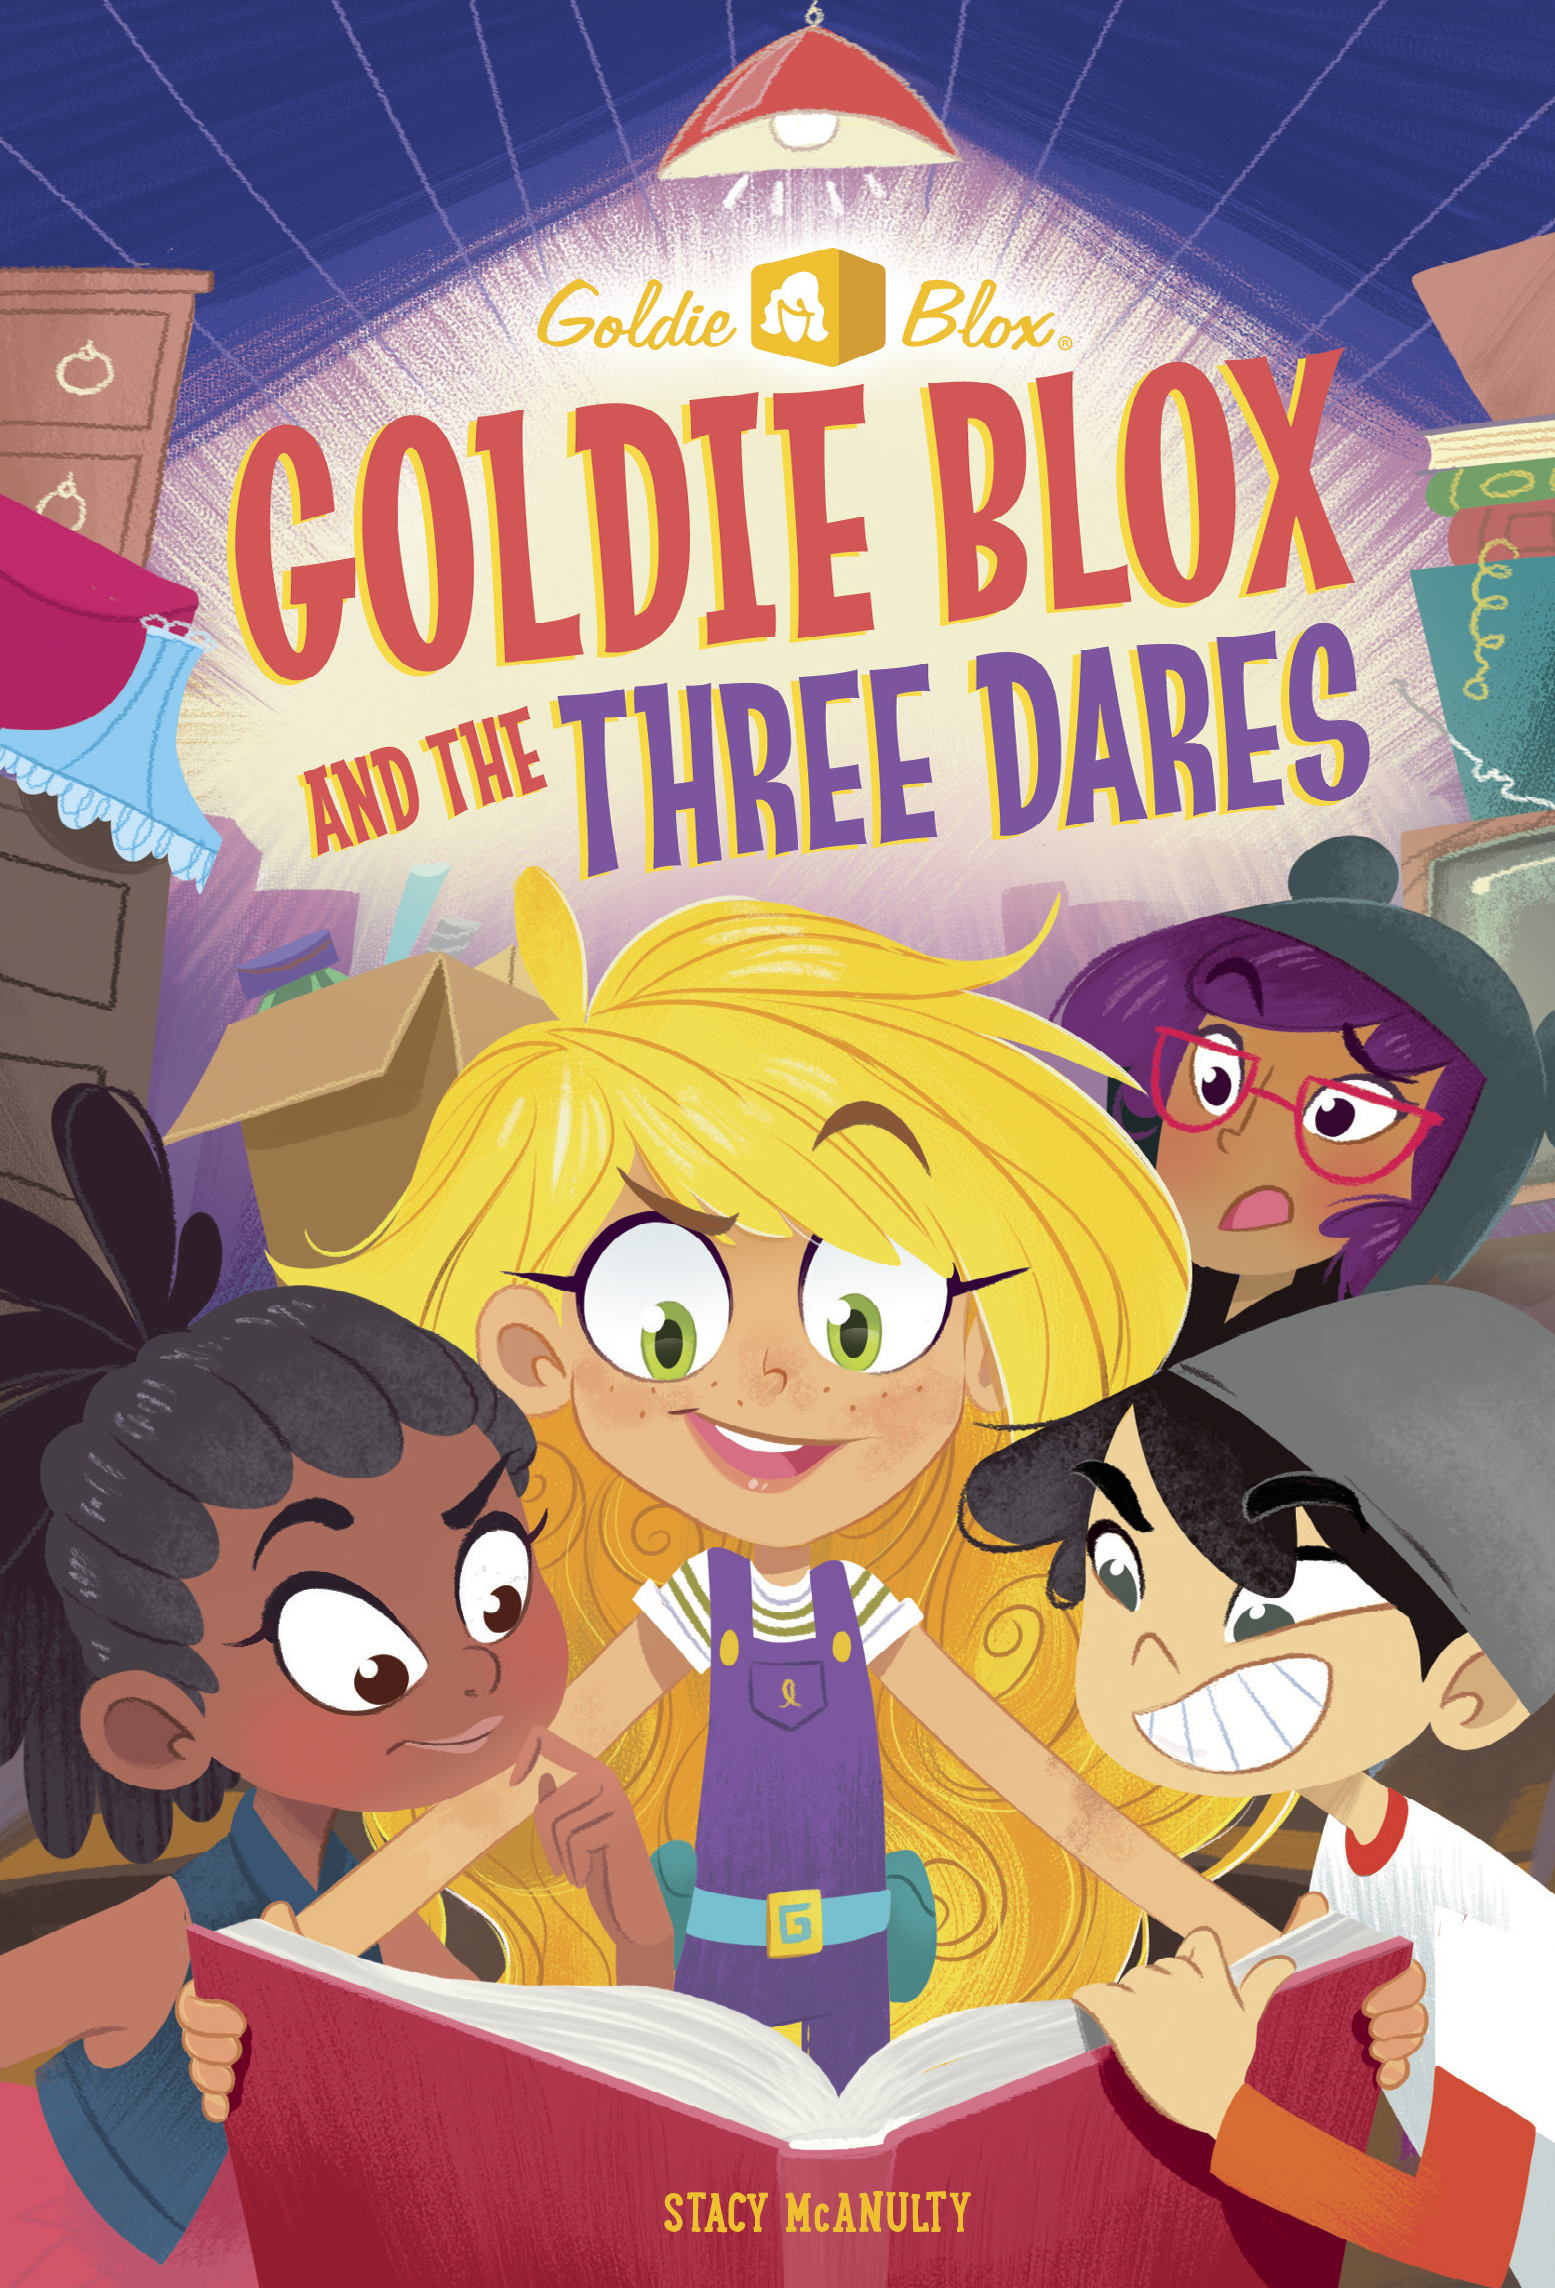 McAnulty, Stacy GOLDIE BLOX #2 AND THE THREE DARES 2017_05 - CB - RLM LK.jpg